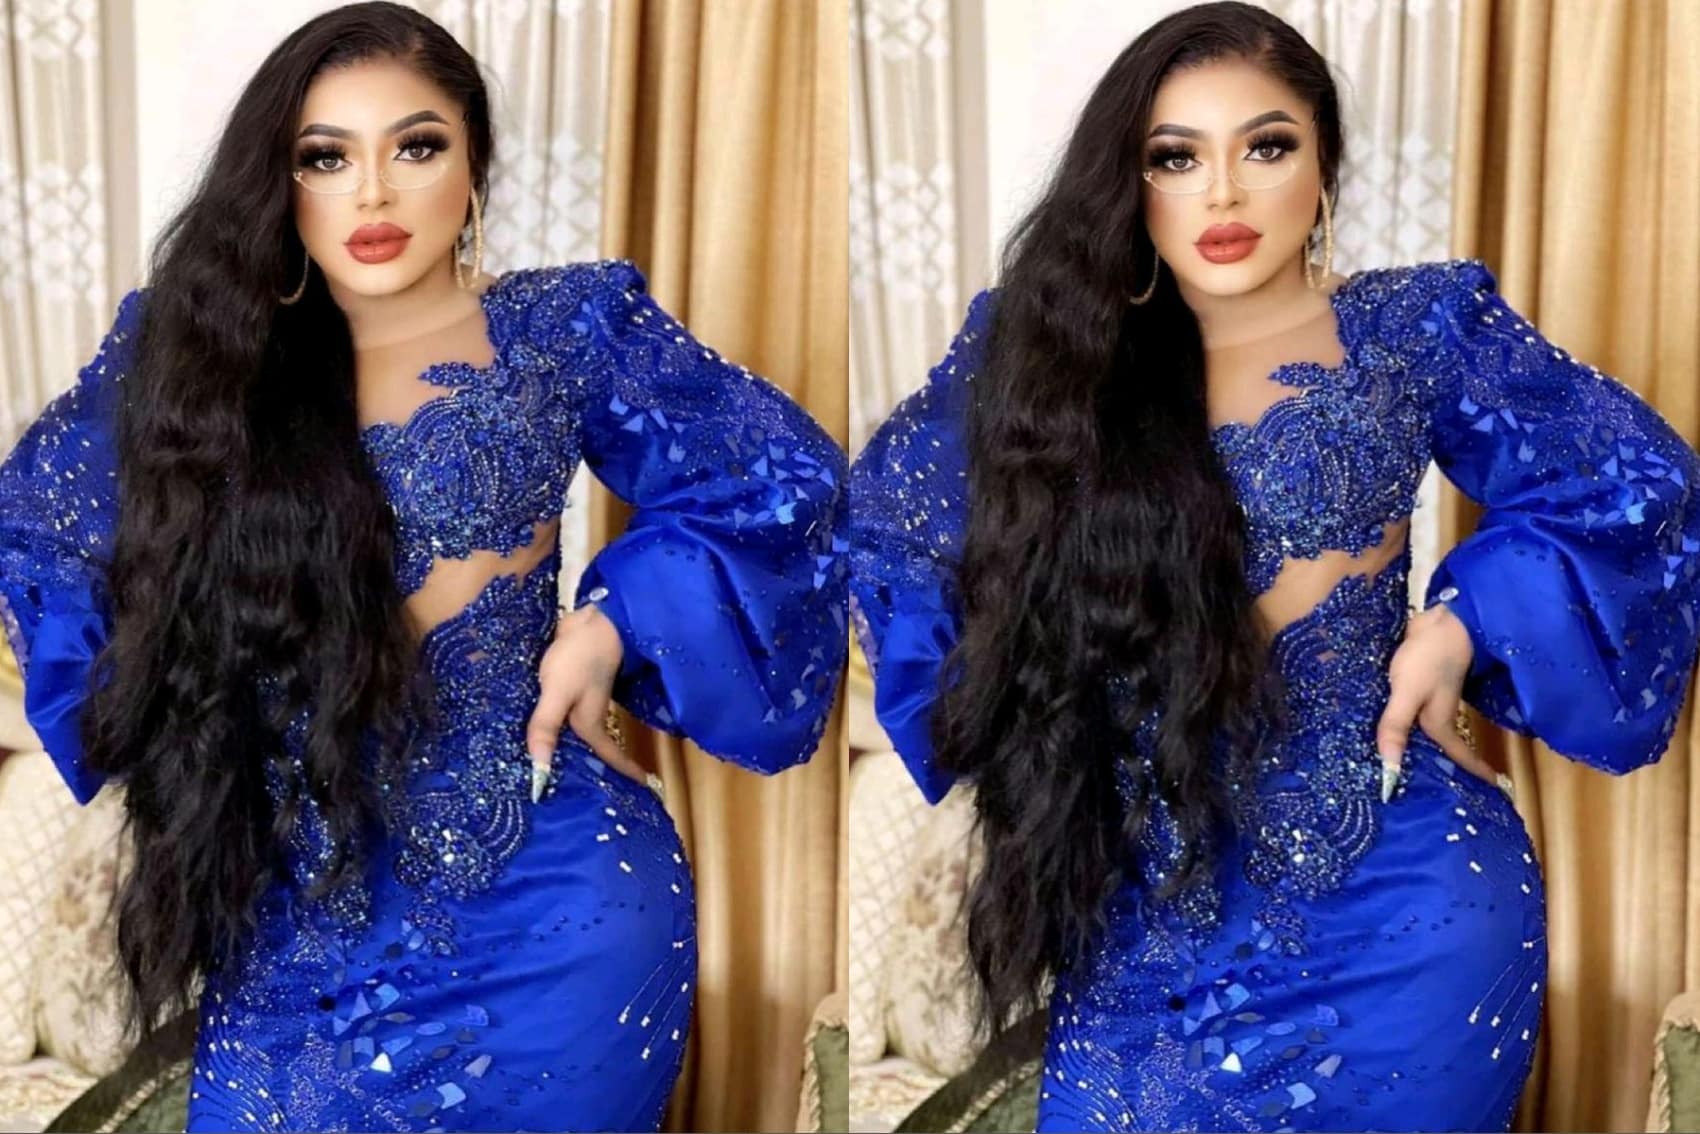 'My hairs are worth over N100m, they can buy houses in Lekki' - Bobrisky brags